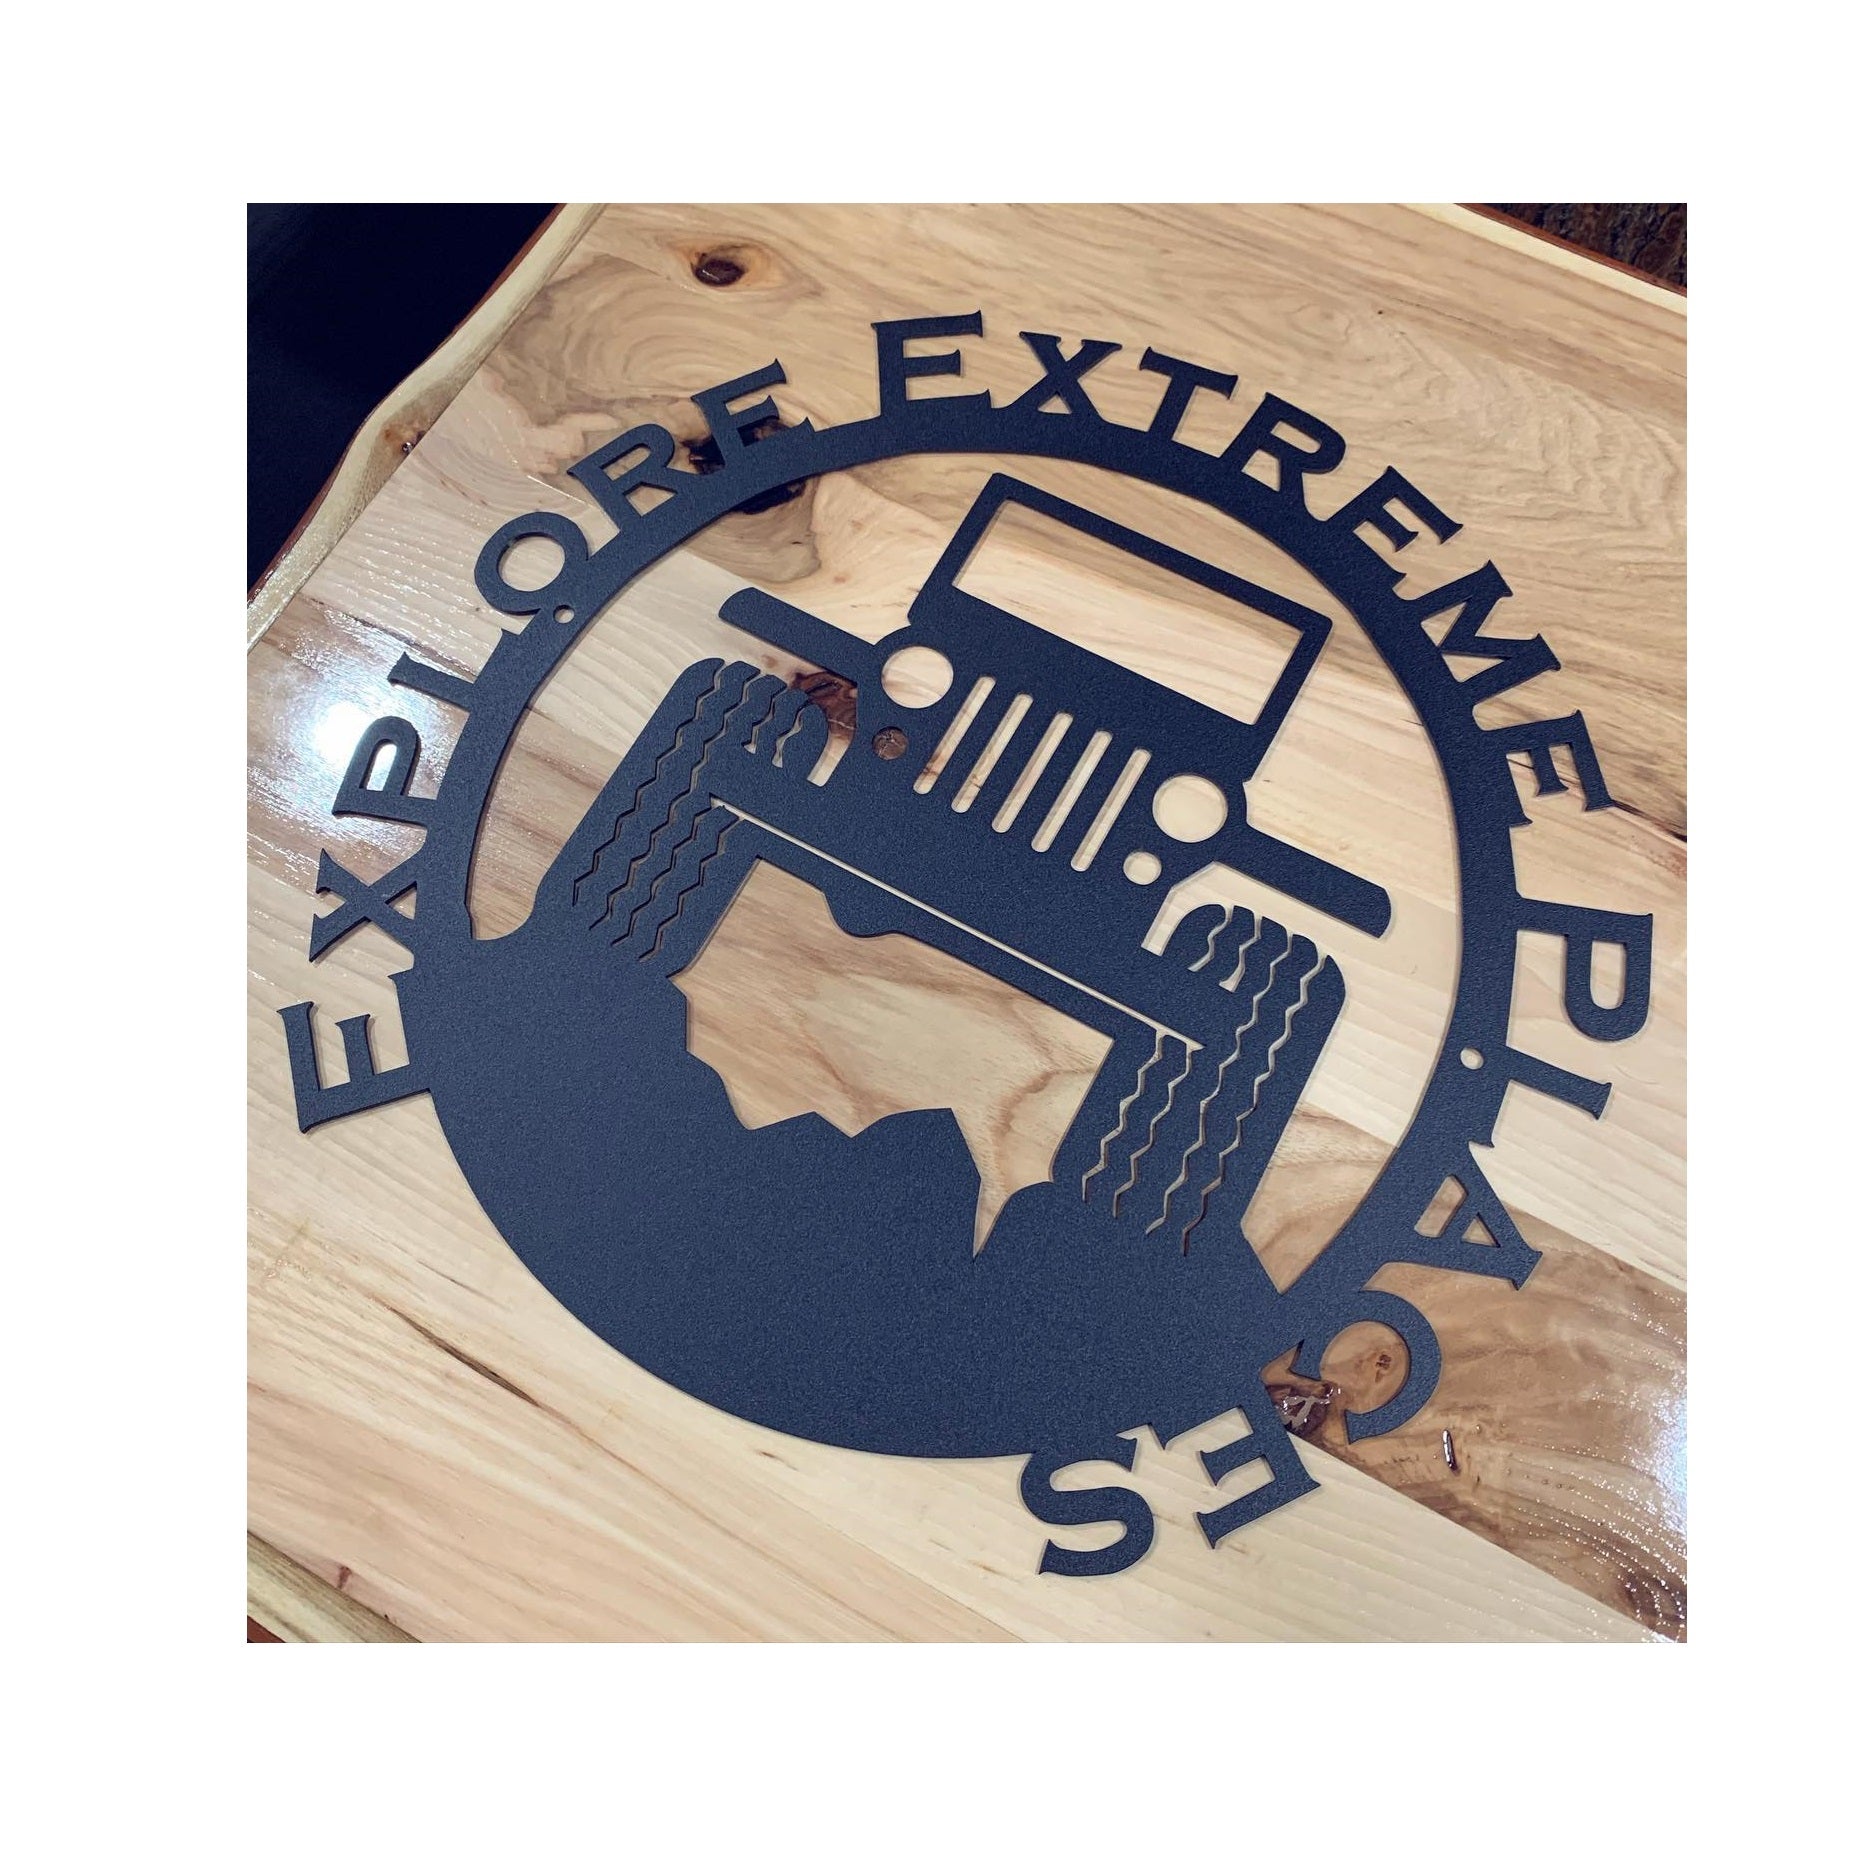 Explore Extreme Places - Off road wall art - The Metal Peddler Wall Art auto, automobile, dad, dad auto, transportation, vehicles, wall art